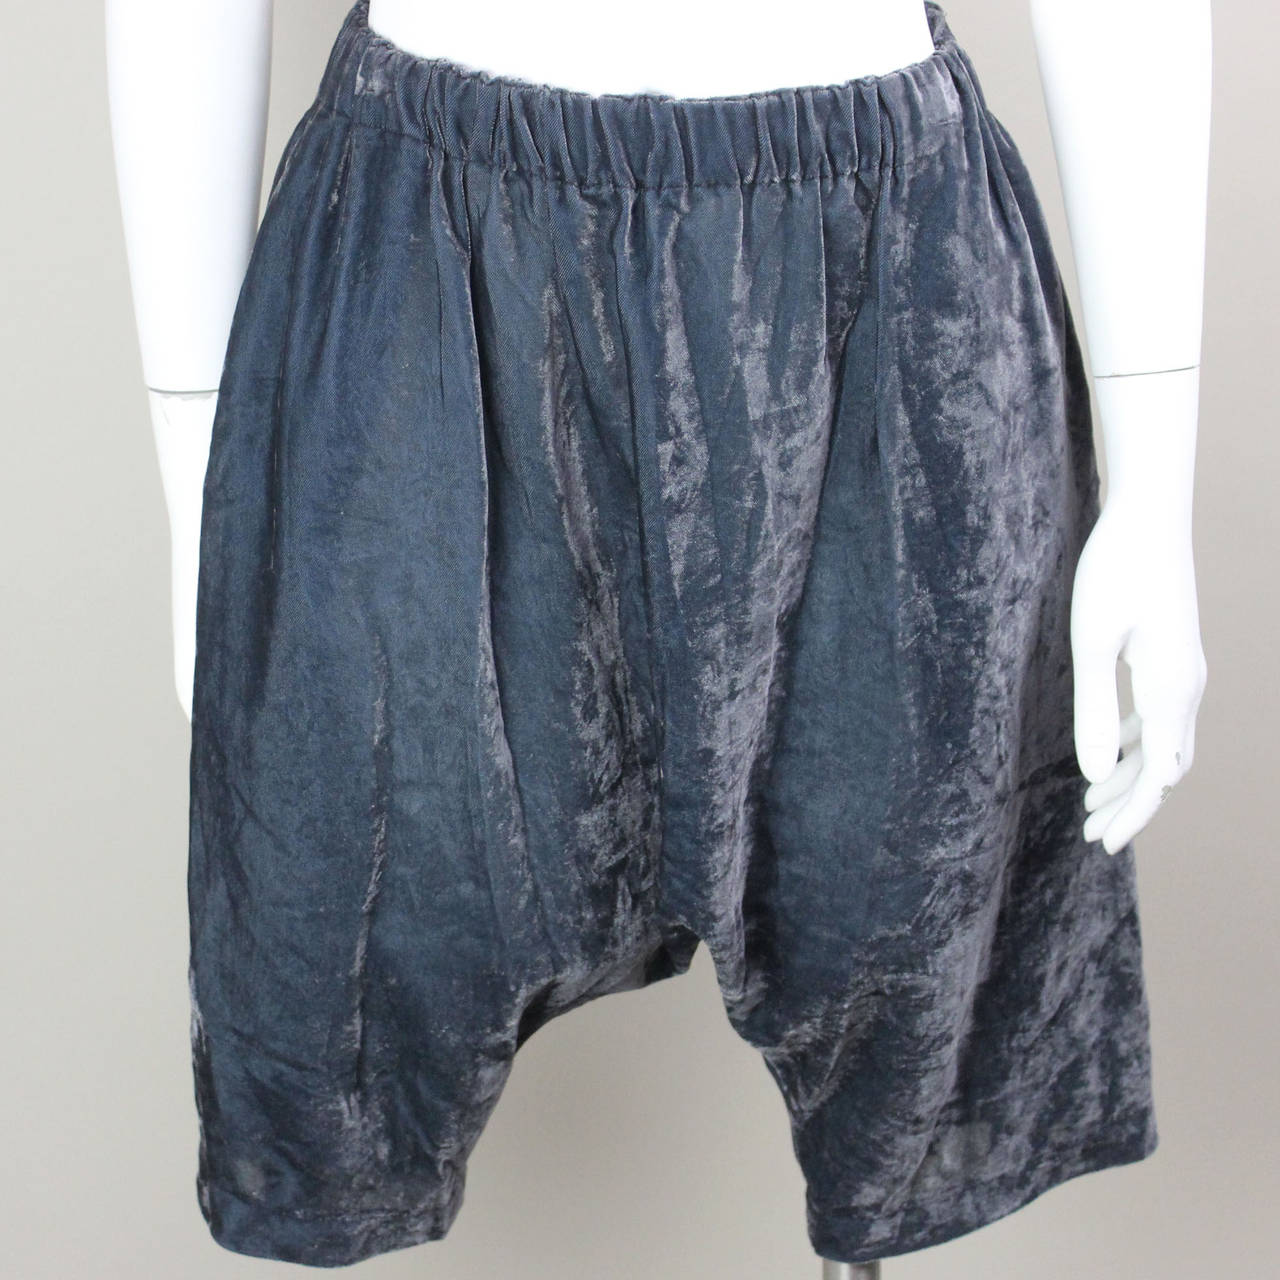 20% OFF! Originally $298
These "harem pants" are a cross between a skirt and pants. Super comfortable and chic, in an iridescent grey/green velvet. These have an elastic waist and pockets.